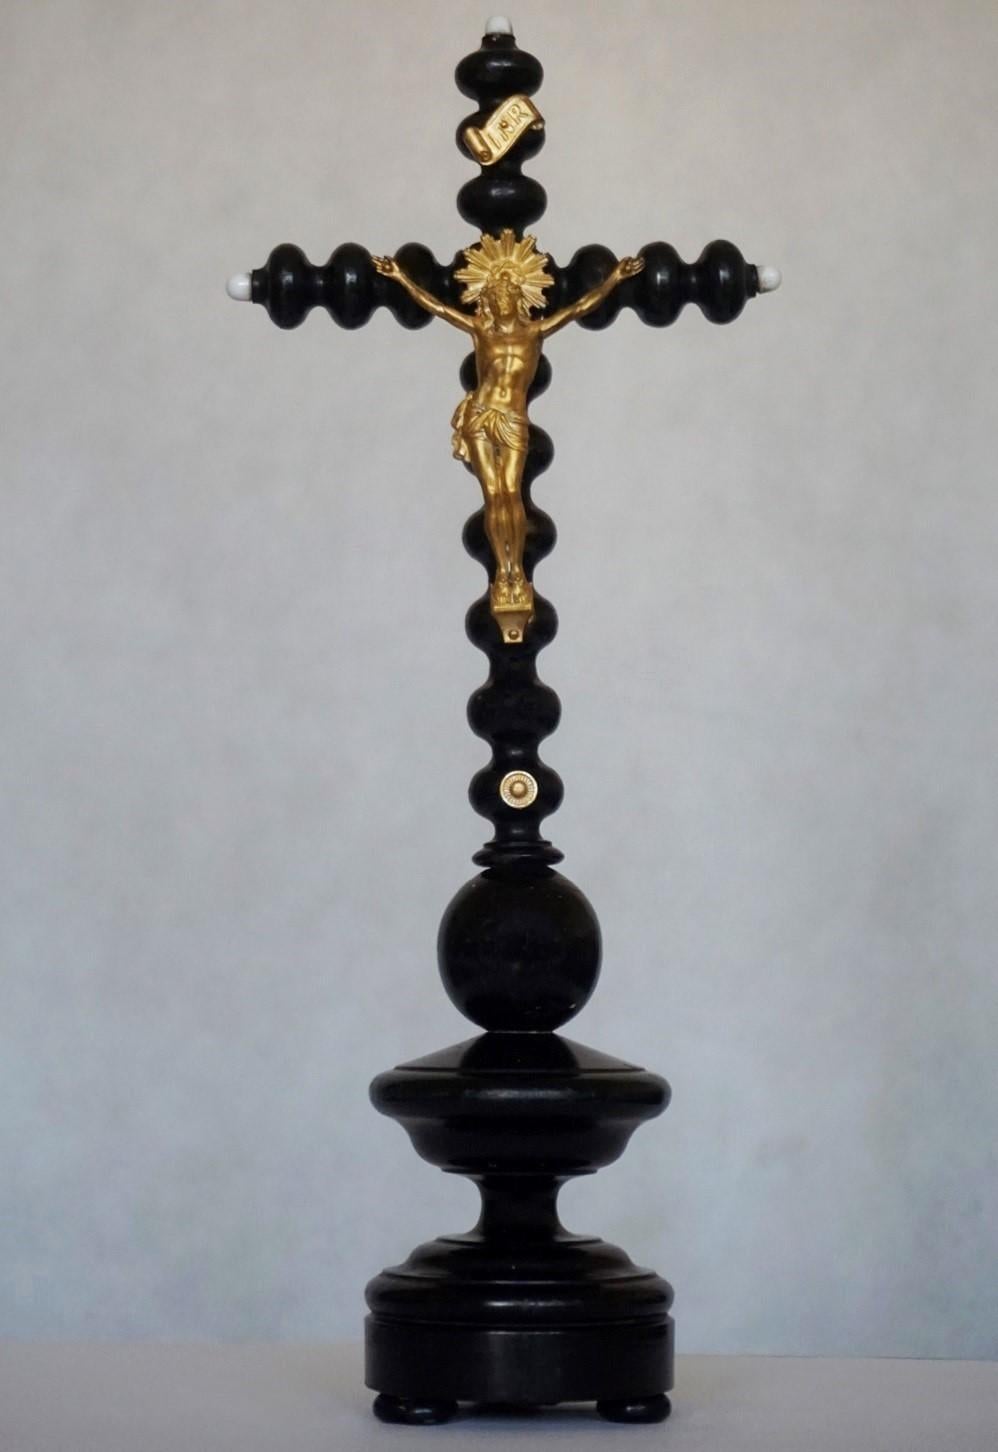 A rare handcrafted black ebonized wooden stand cross with gilt bronze Christ, in fine antique condition, Netherlands, mid-19th century.
Dimensions: Height 15.50